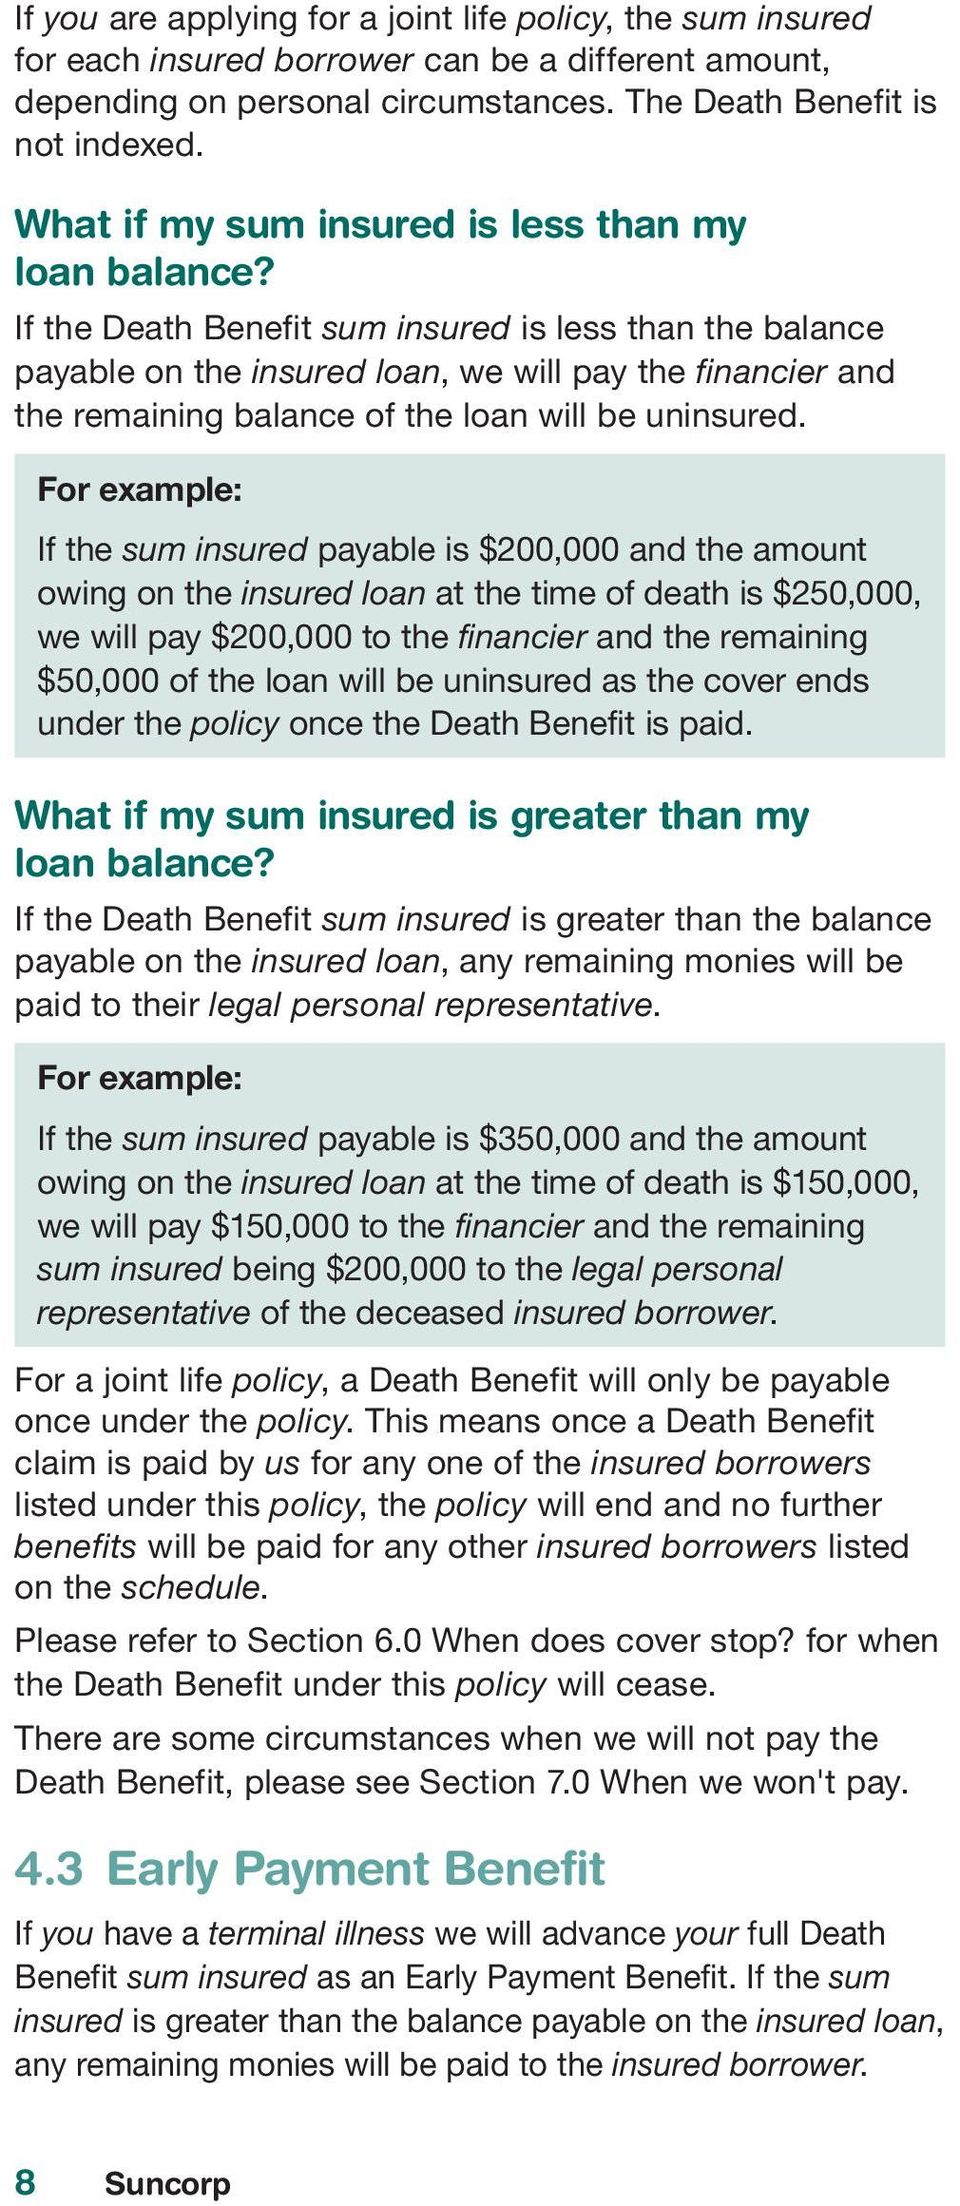 If the Death Benefit sum insured is less than the balance payable on the insured loan, we will pay the financier and the remaining balance of the loan will be uninsured.